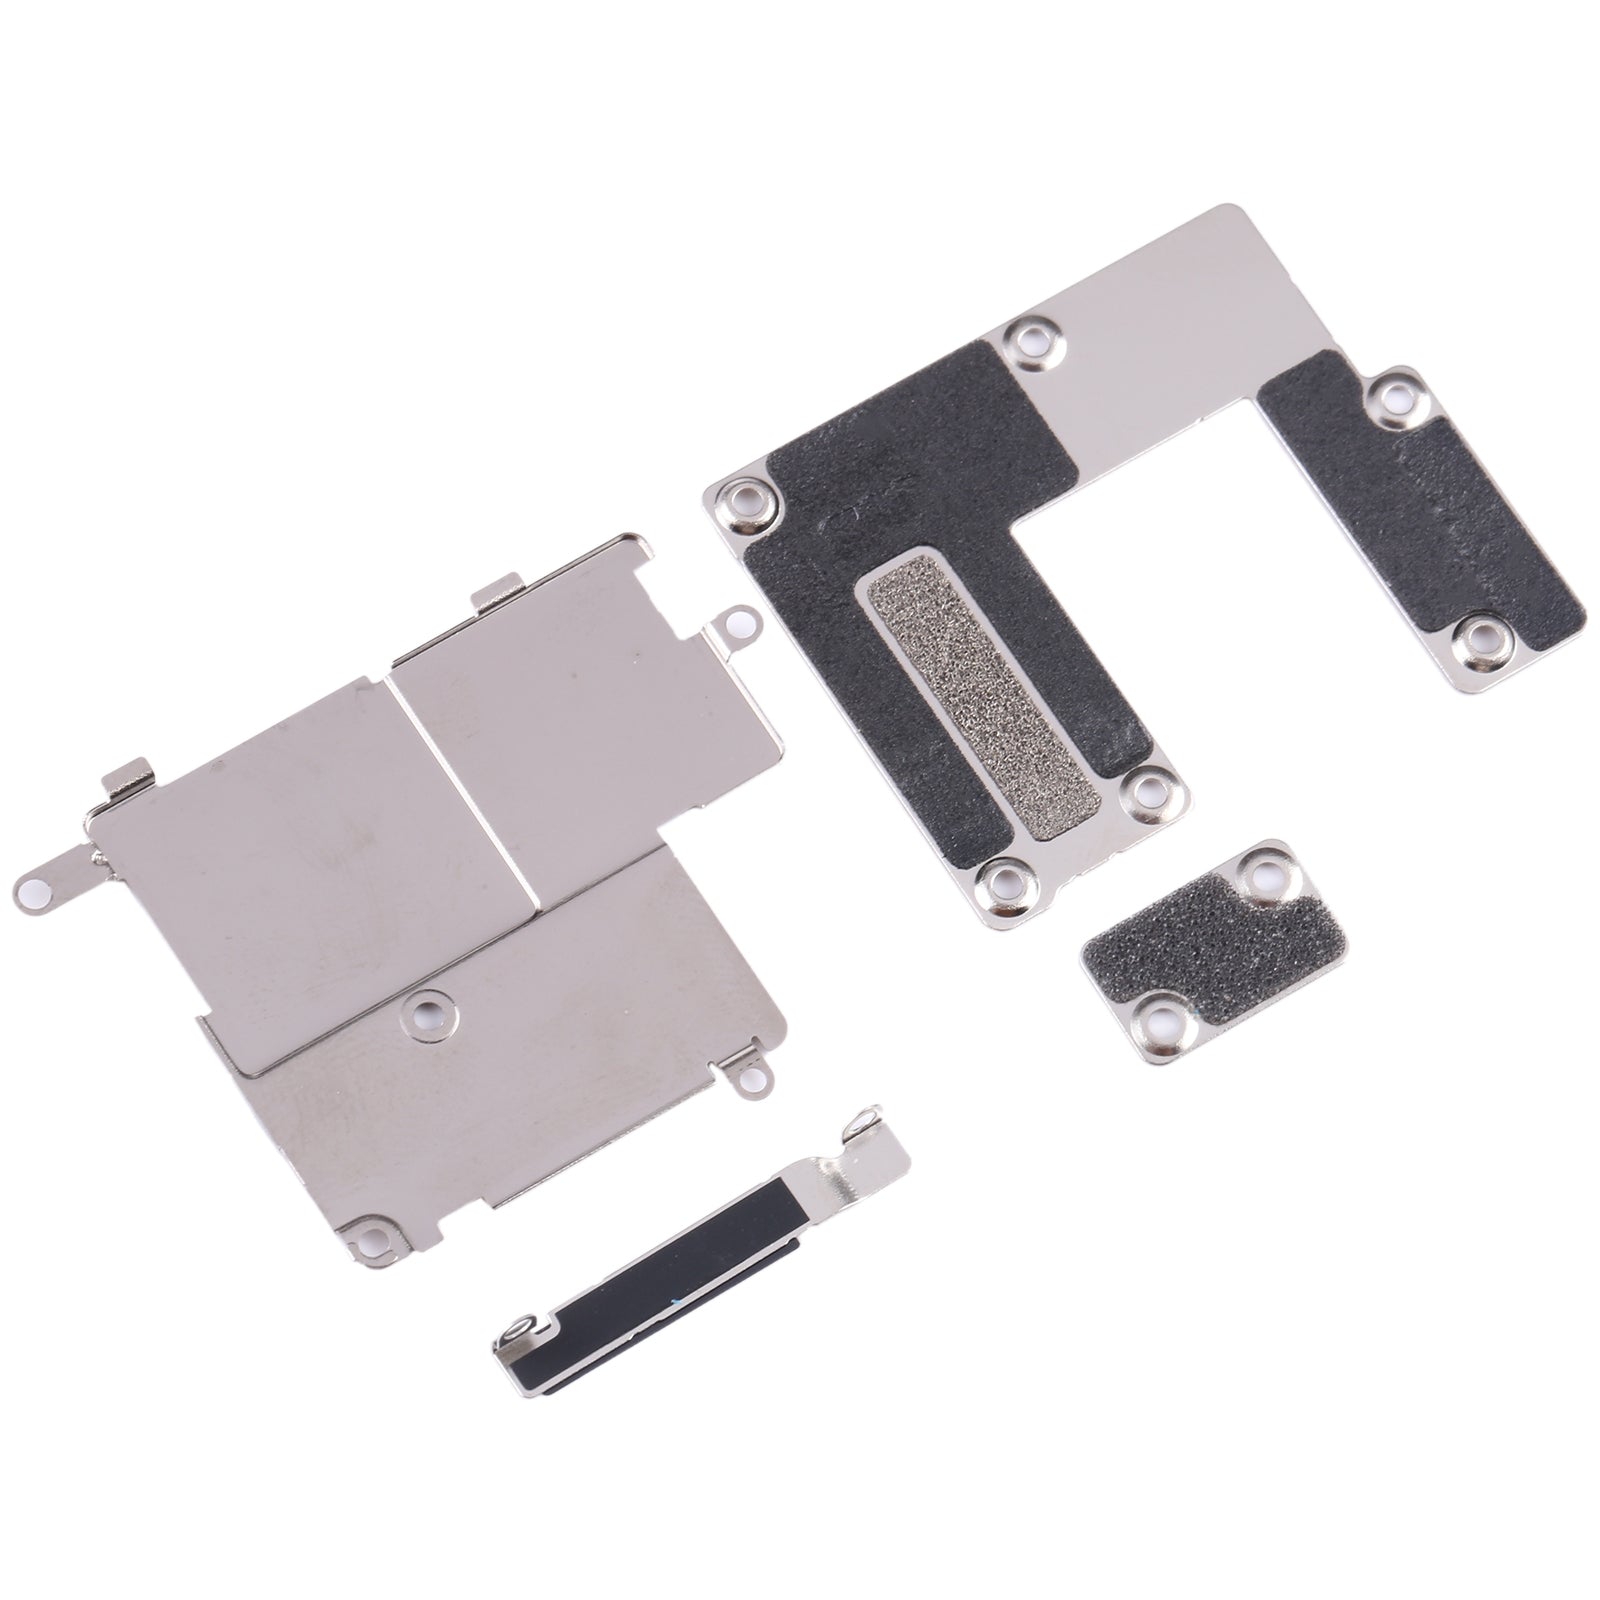 Pack of Internal Metal Parts iPhone 11 Pro Max